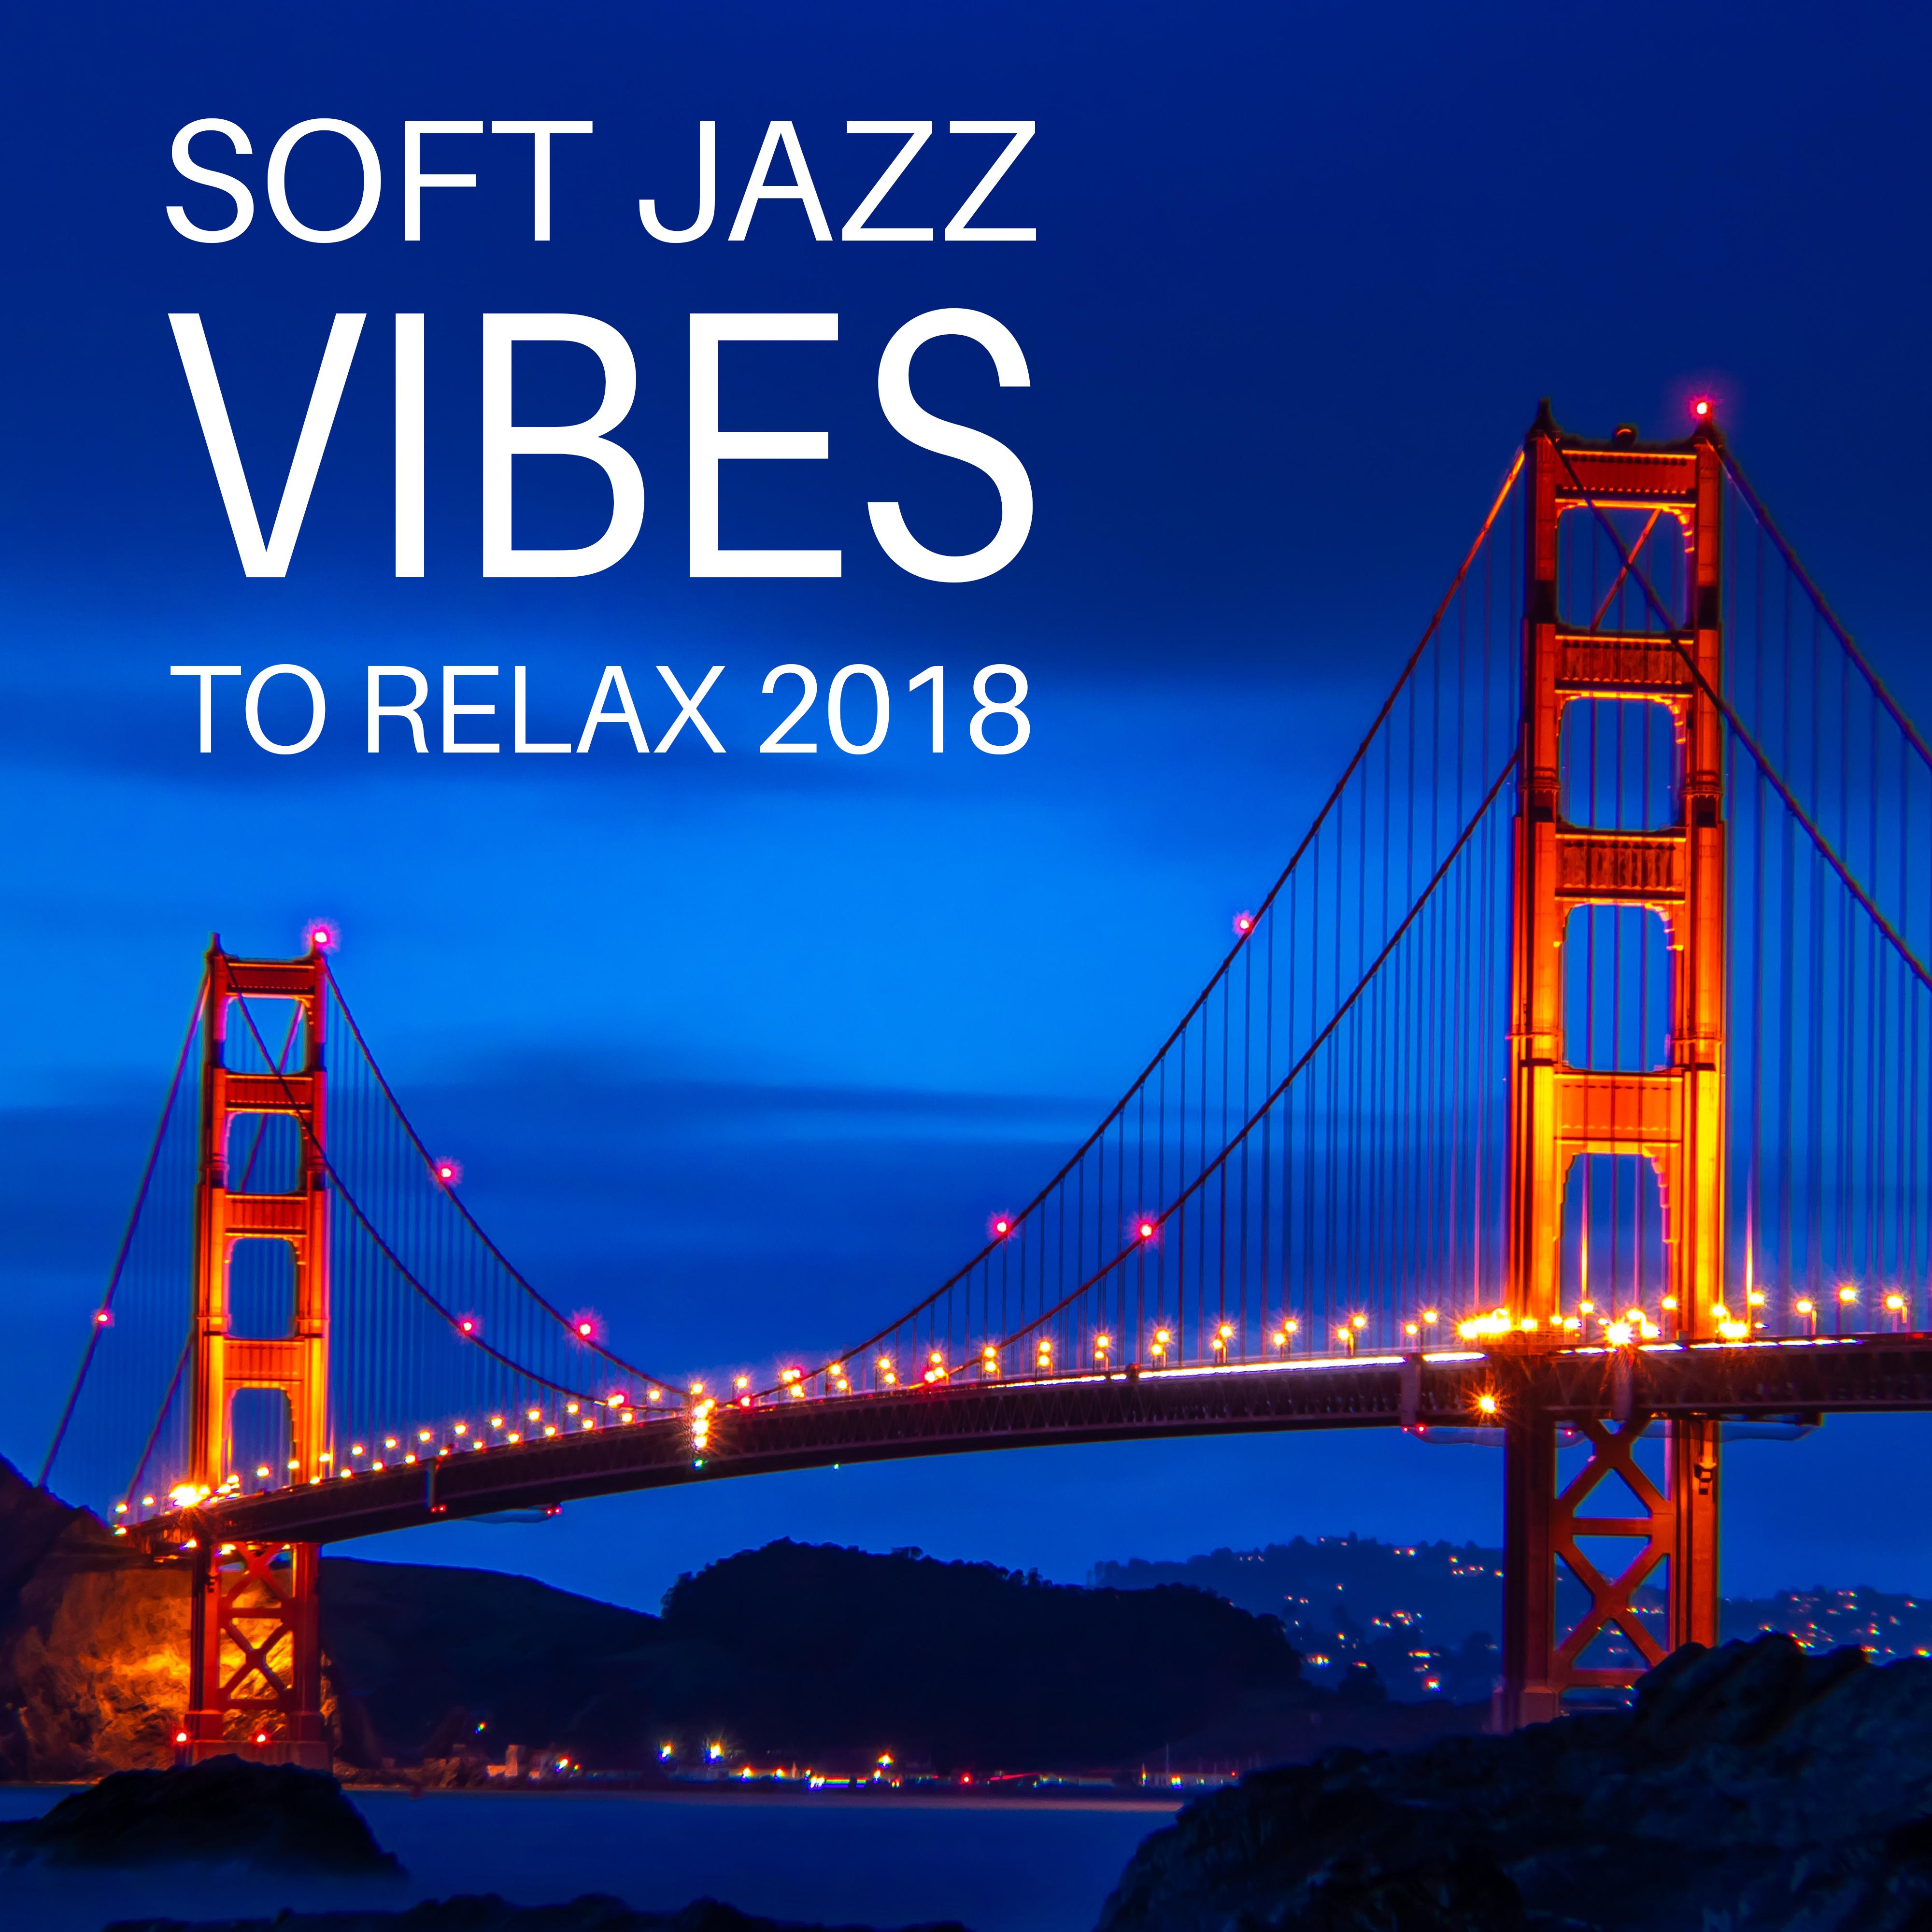 Soft Jazz Vibes to Relax 2018